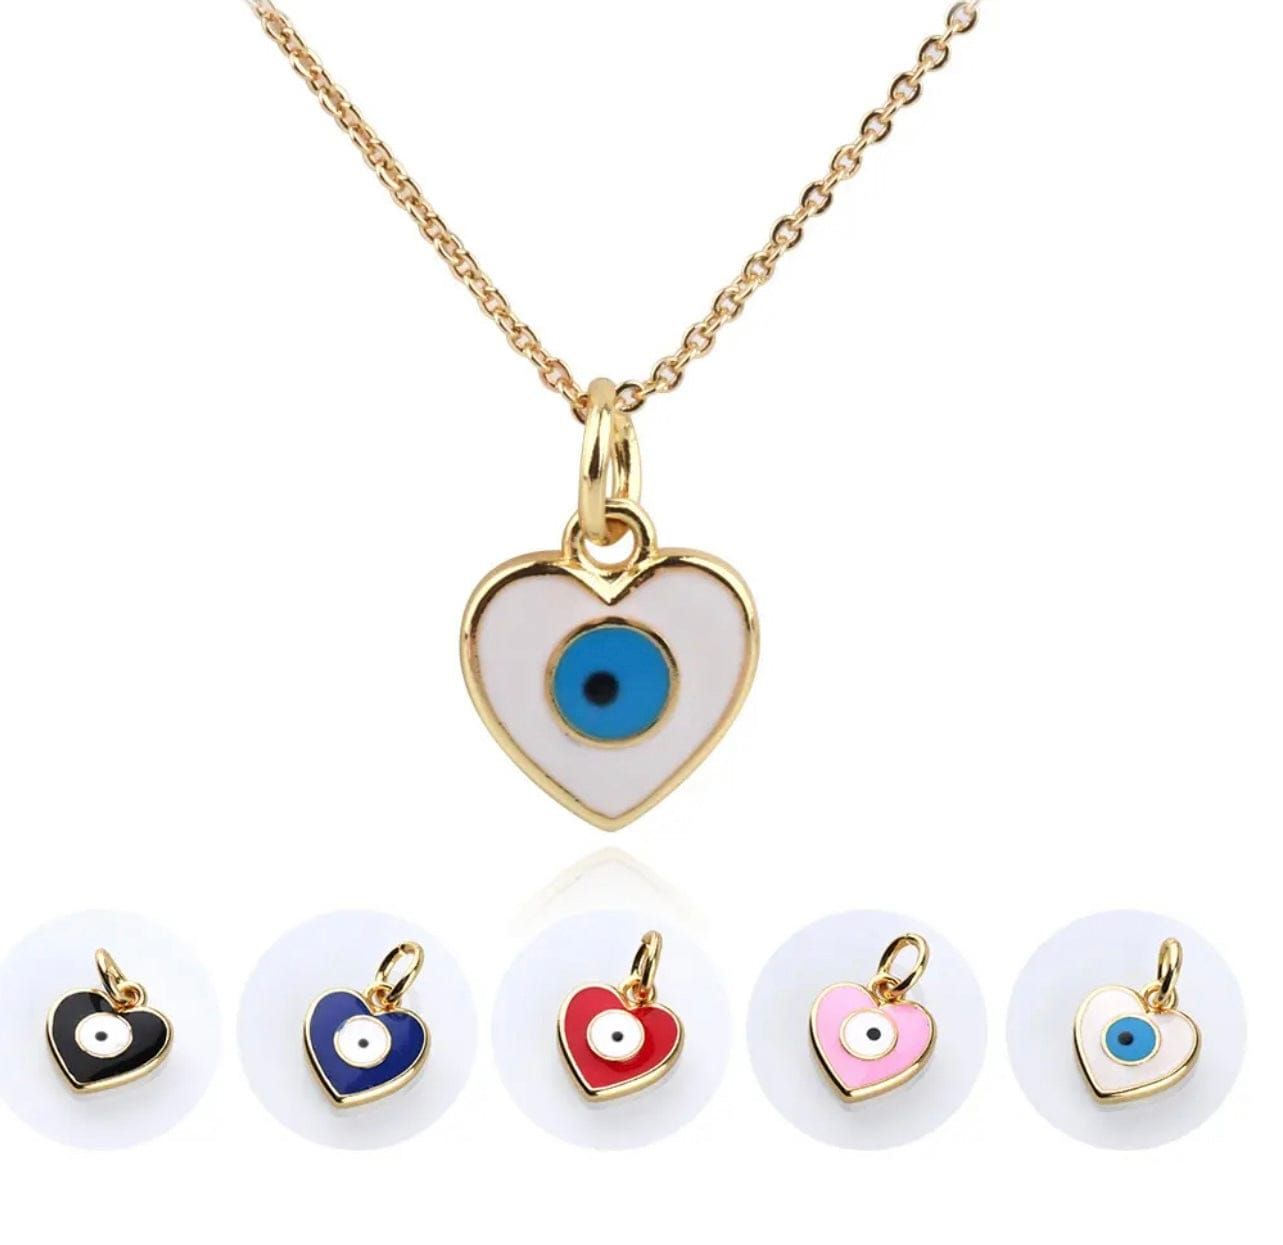 Eye on the heart necklace - Maily's Classic Accessories